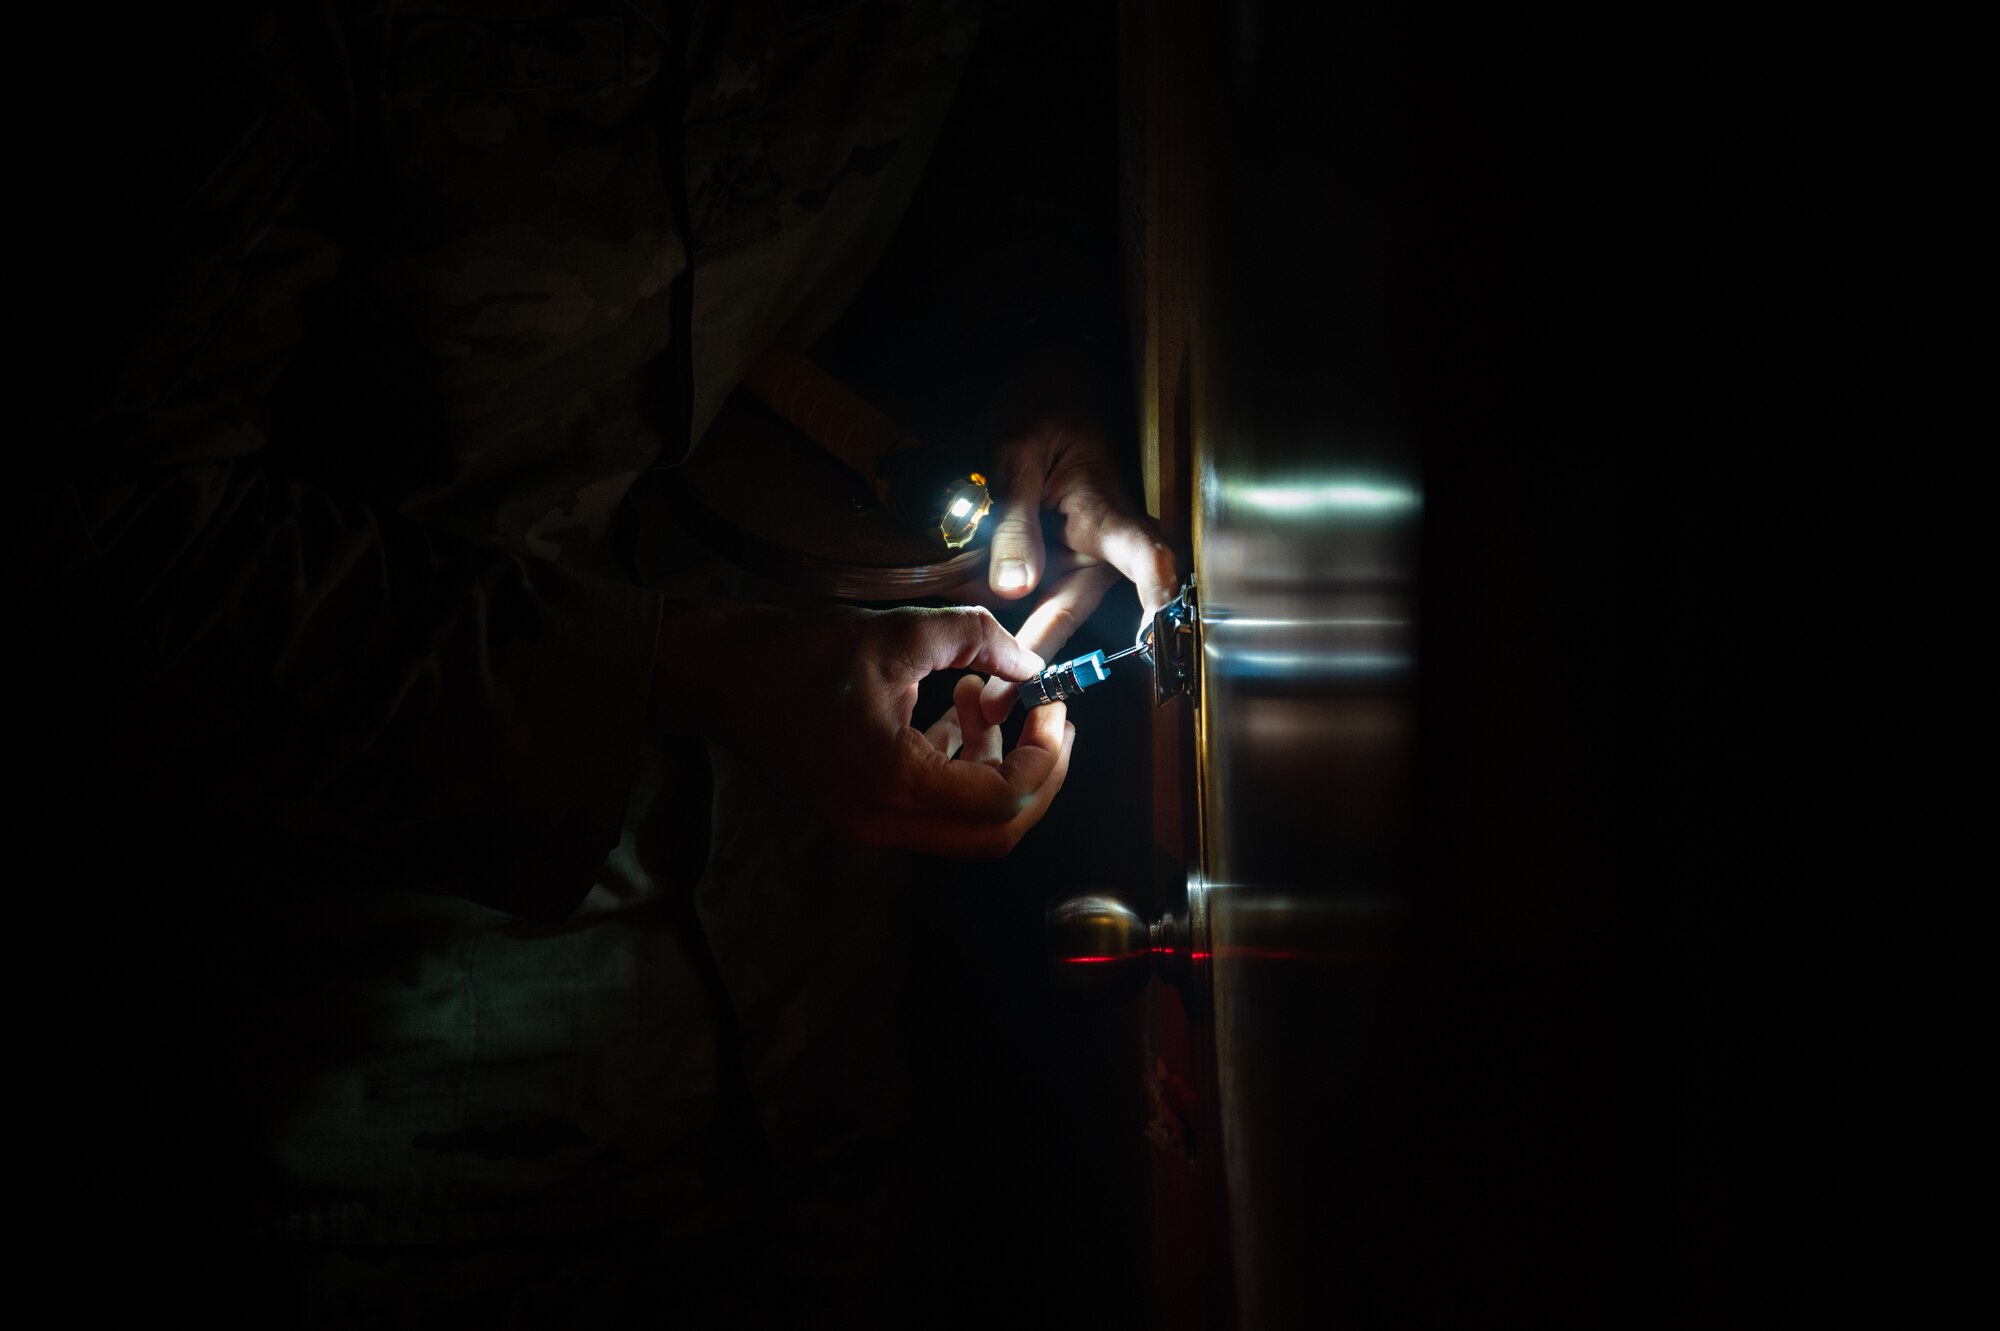 U.S. Air Force Maj. Jacob S. Flatz, 379th Expeditionary Civil Engineer Squadron deputy commander, unlocks a padlocked door in simulated low visibility conditions Oct. 12, 2022 at Al Udeid Air Base, Qatar. The escape room fire safety exercise helps to build upon fundamentals of fire safety such as communication, problem solving and planning. (U.S. Air Force photo by Staff Sgt. Dana Tourtellotte)